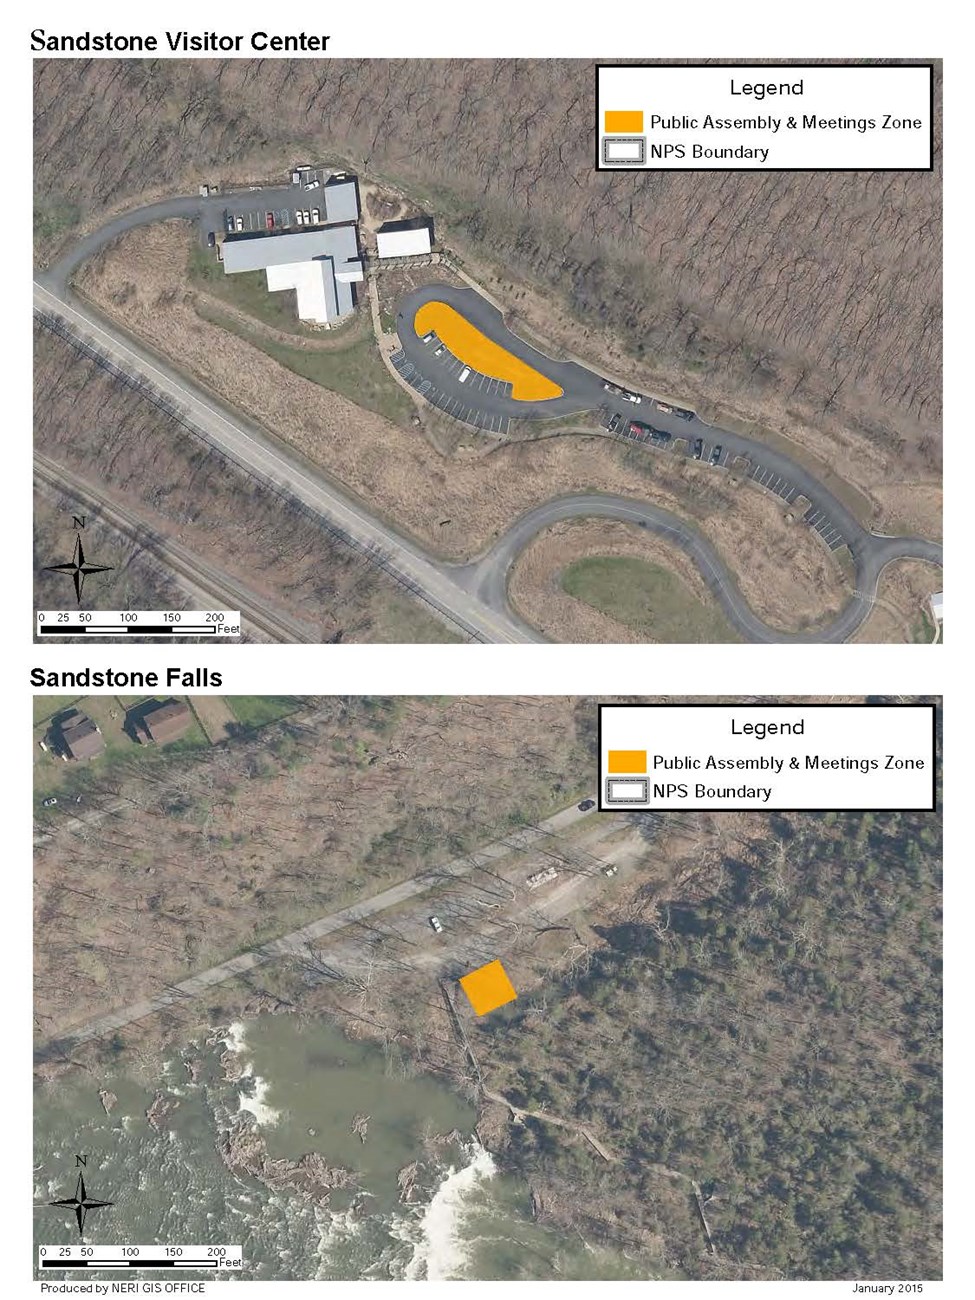 Public Assembly Maps for Sandstone VC and Sandstone Falls